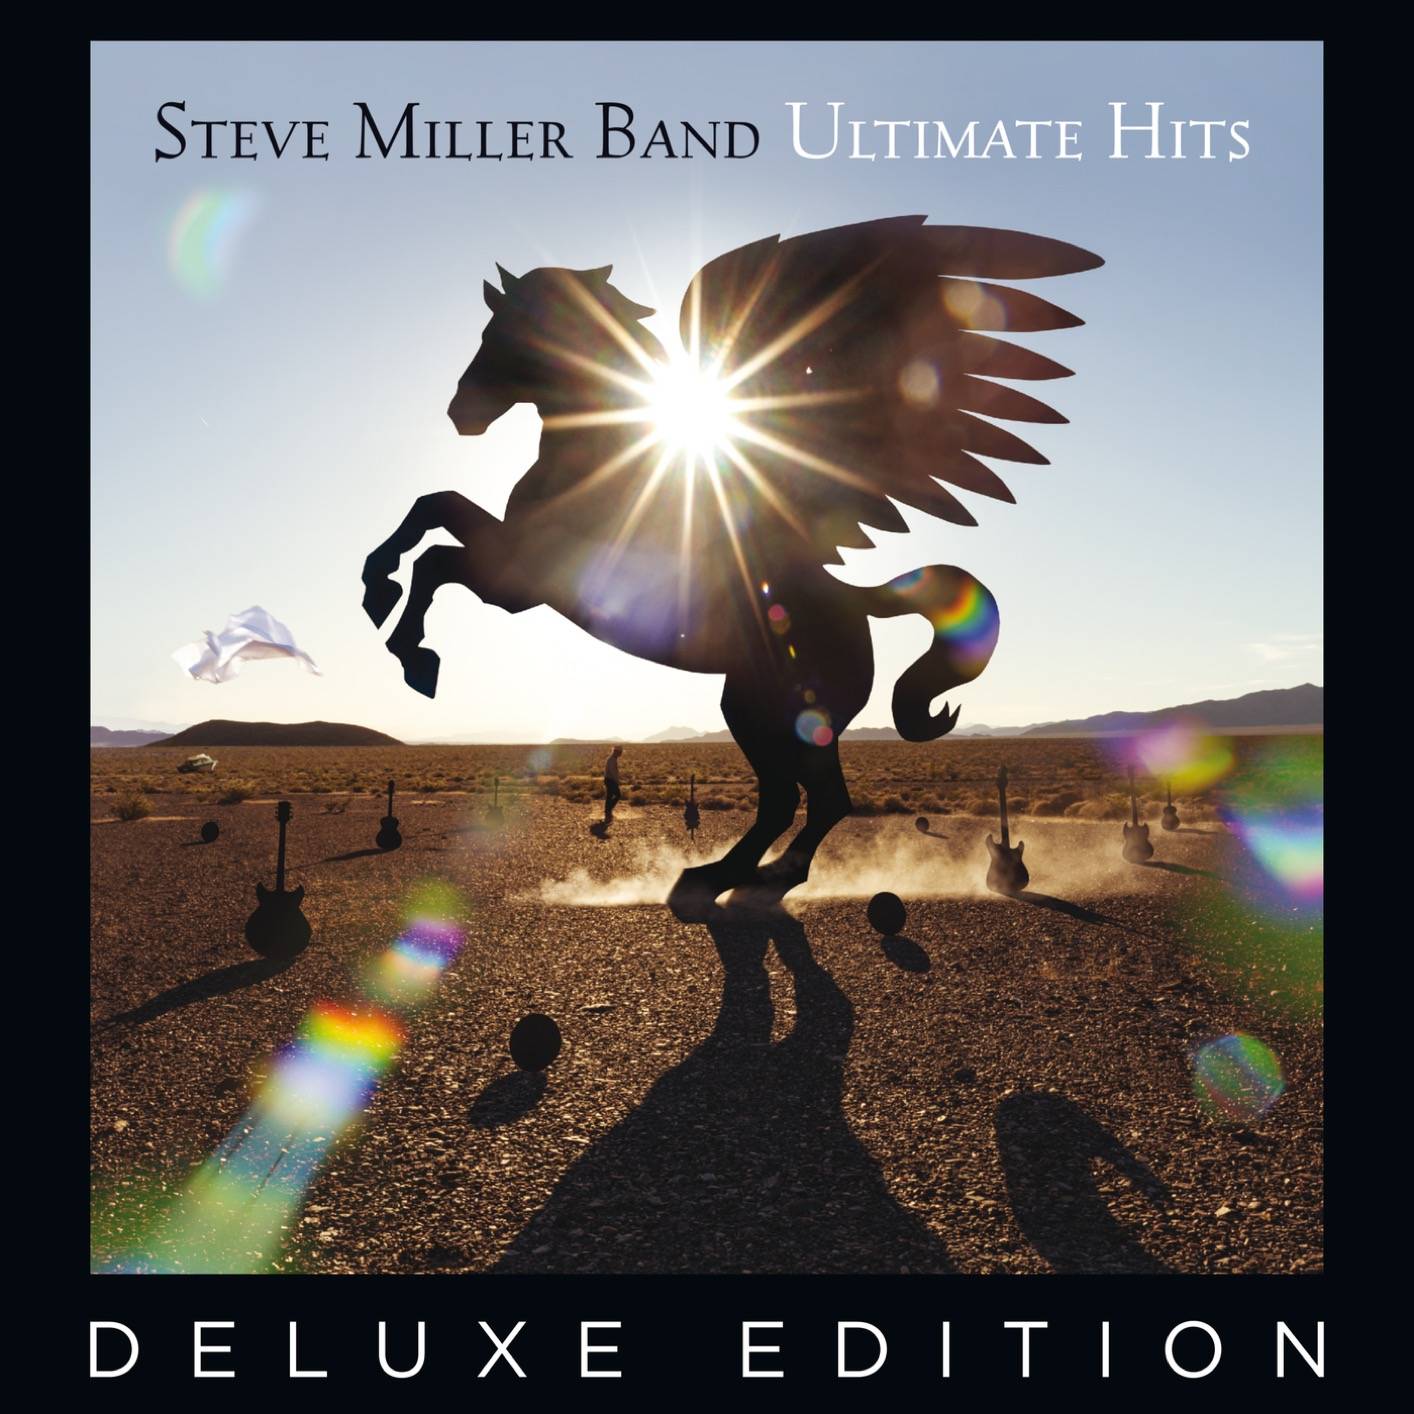 Steve Miller Band – Ultimate Hits (Deluxe Edition Remastered) (2017) [FLAC 24bit/96kHz]